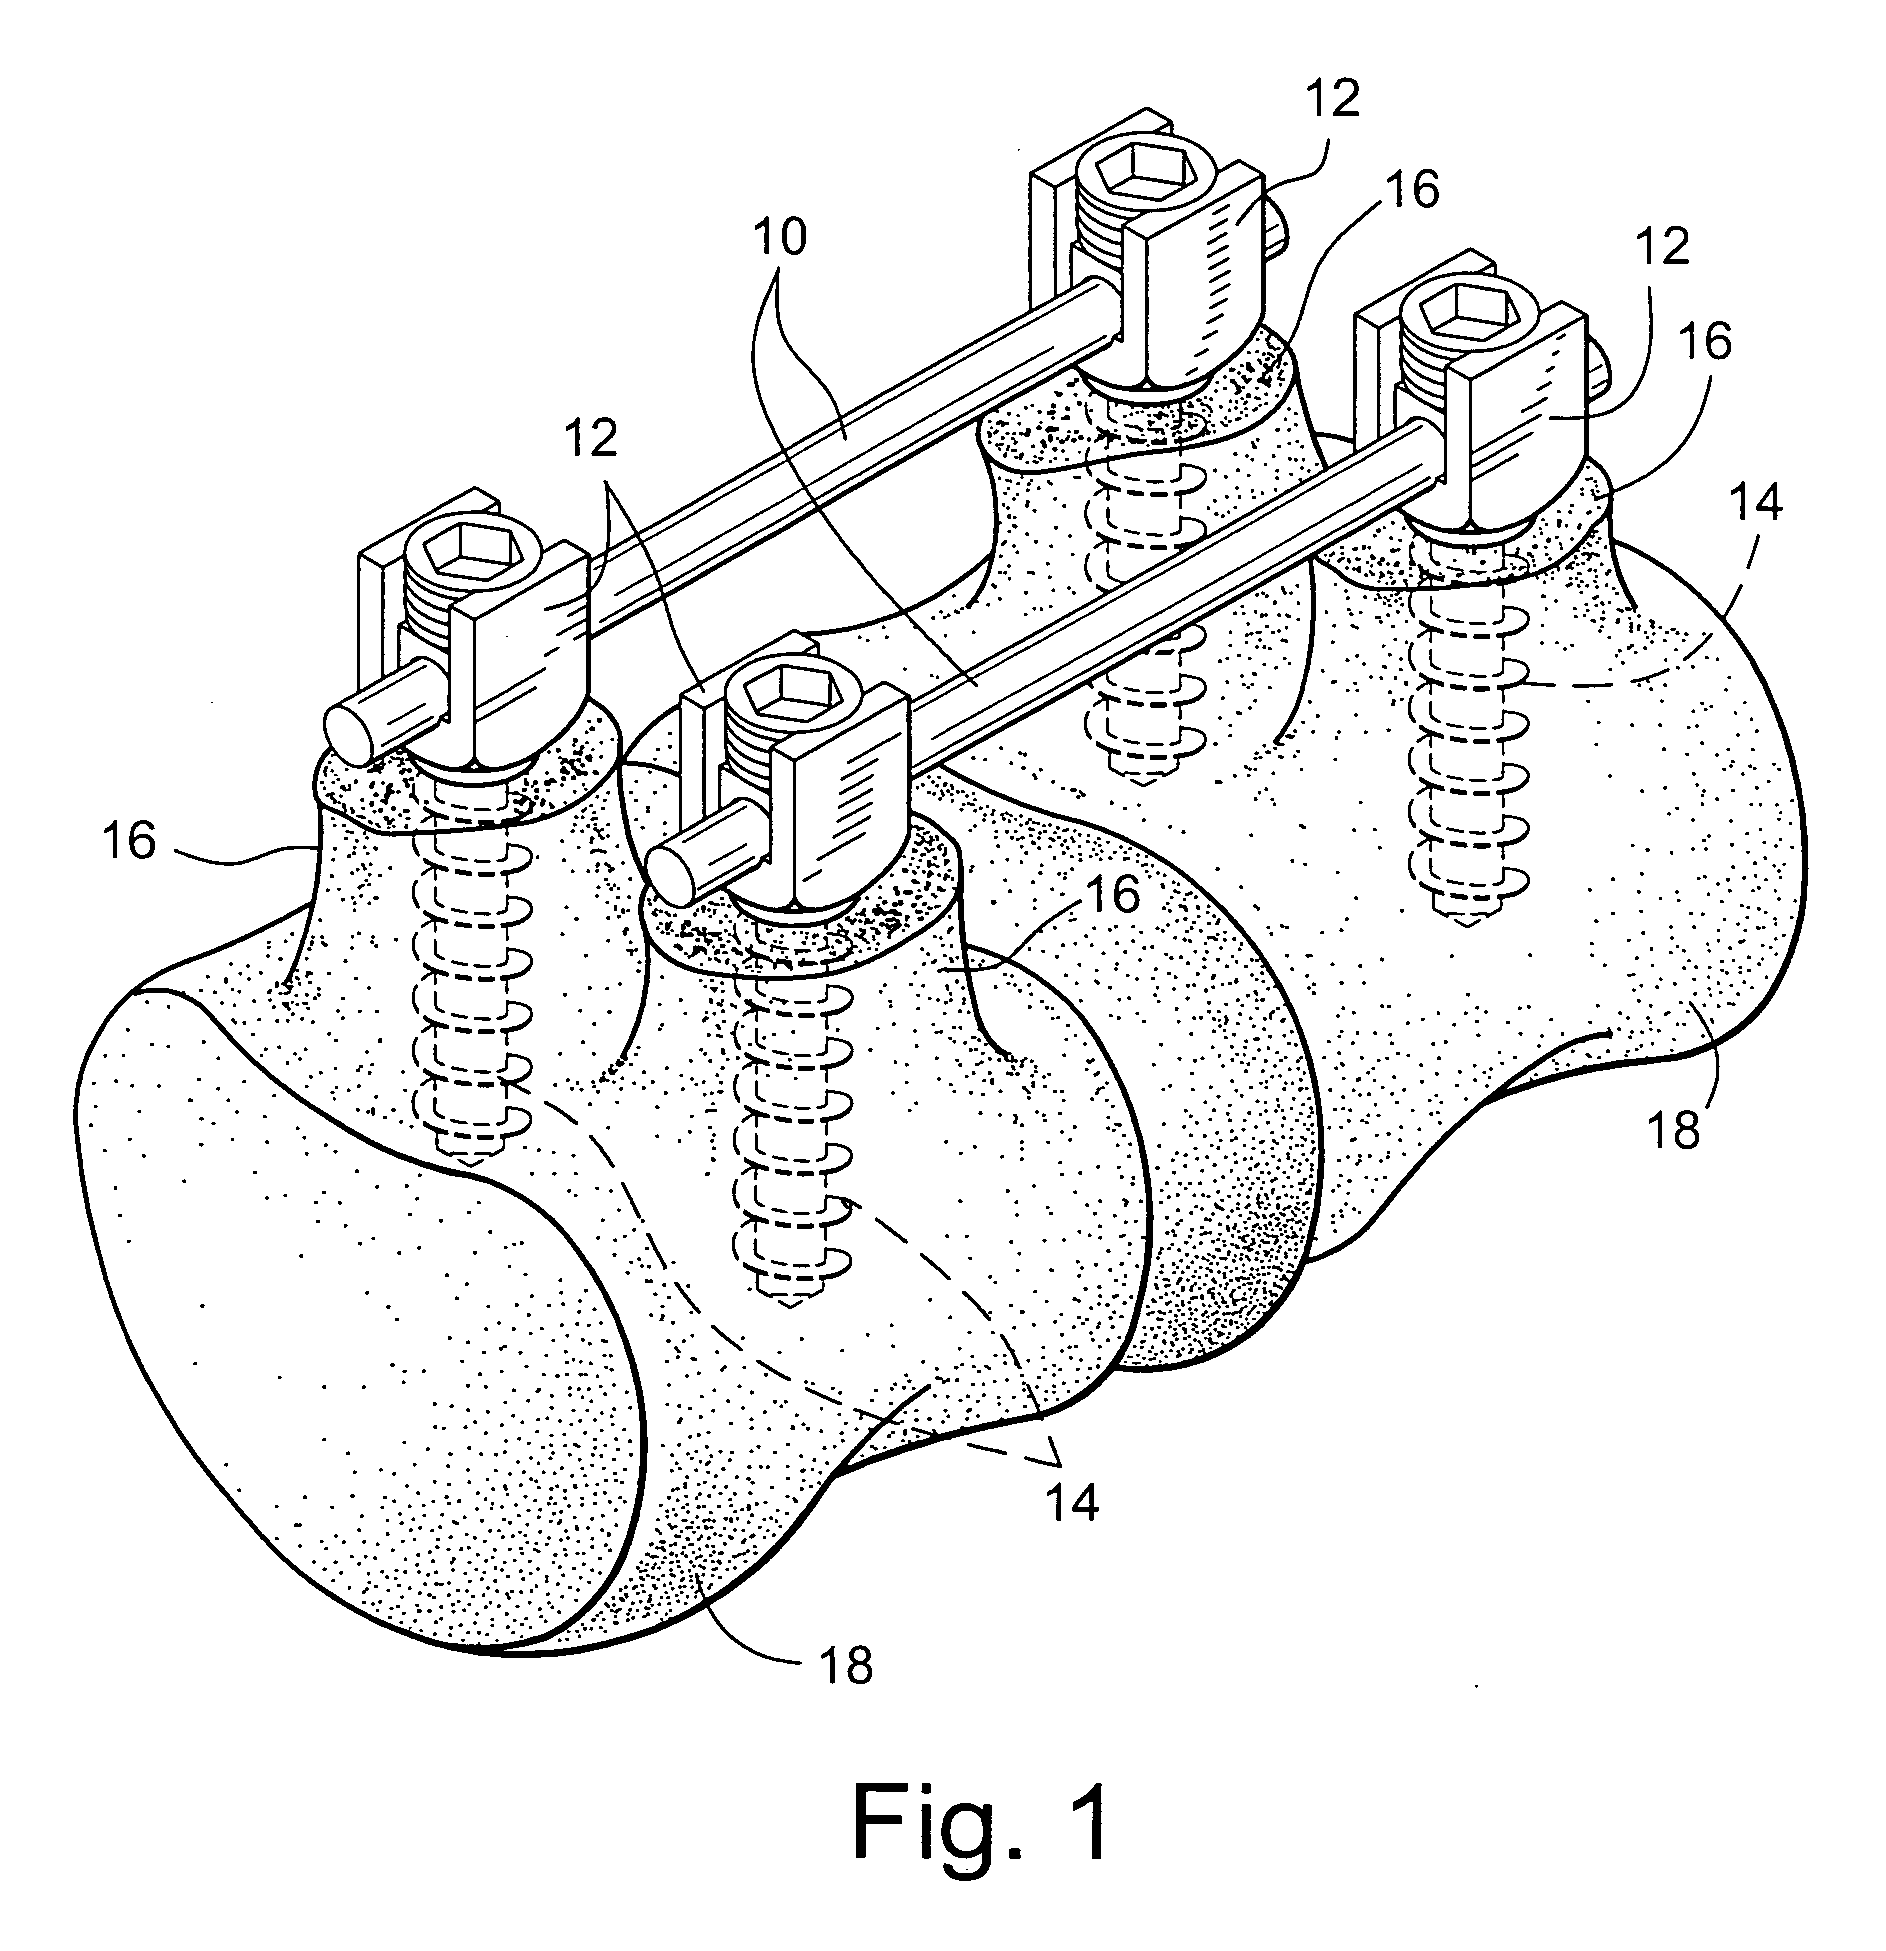 Apparatus and method for flexible spinal fixation